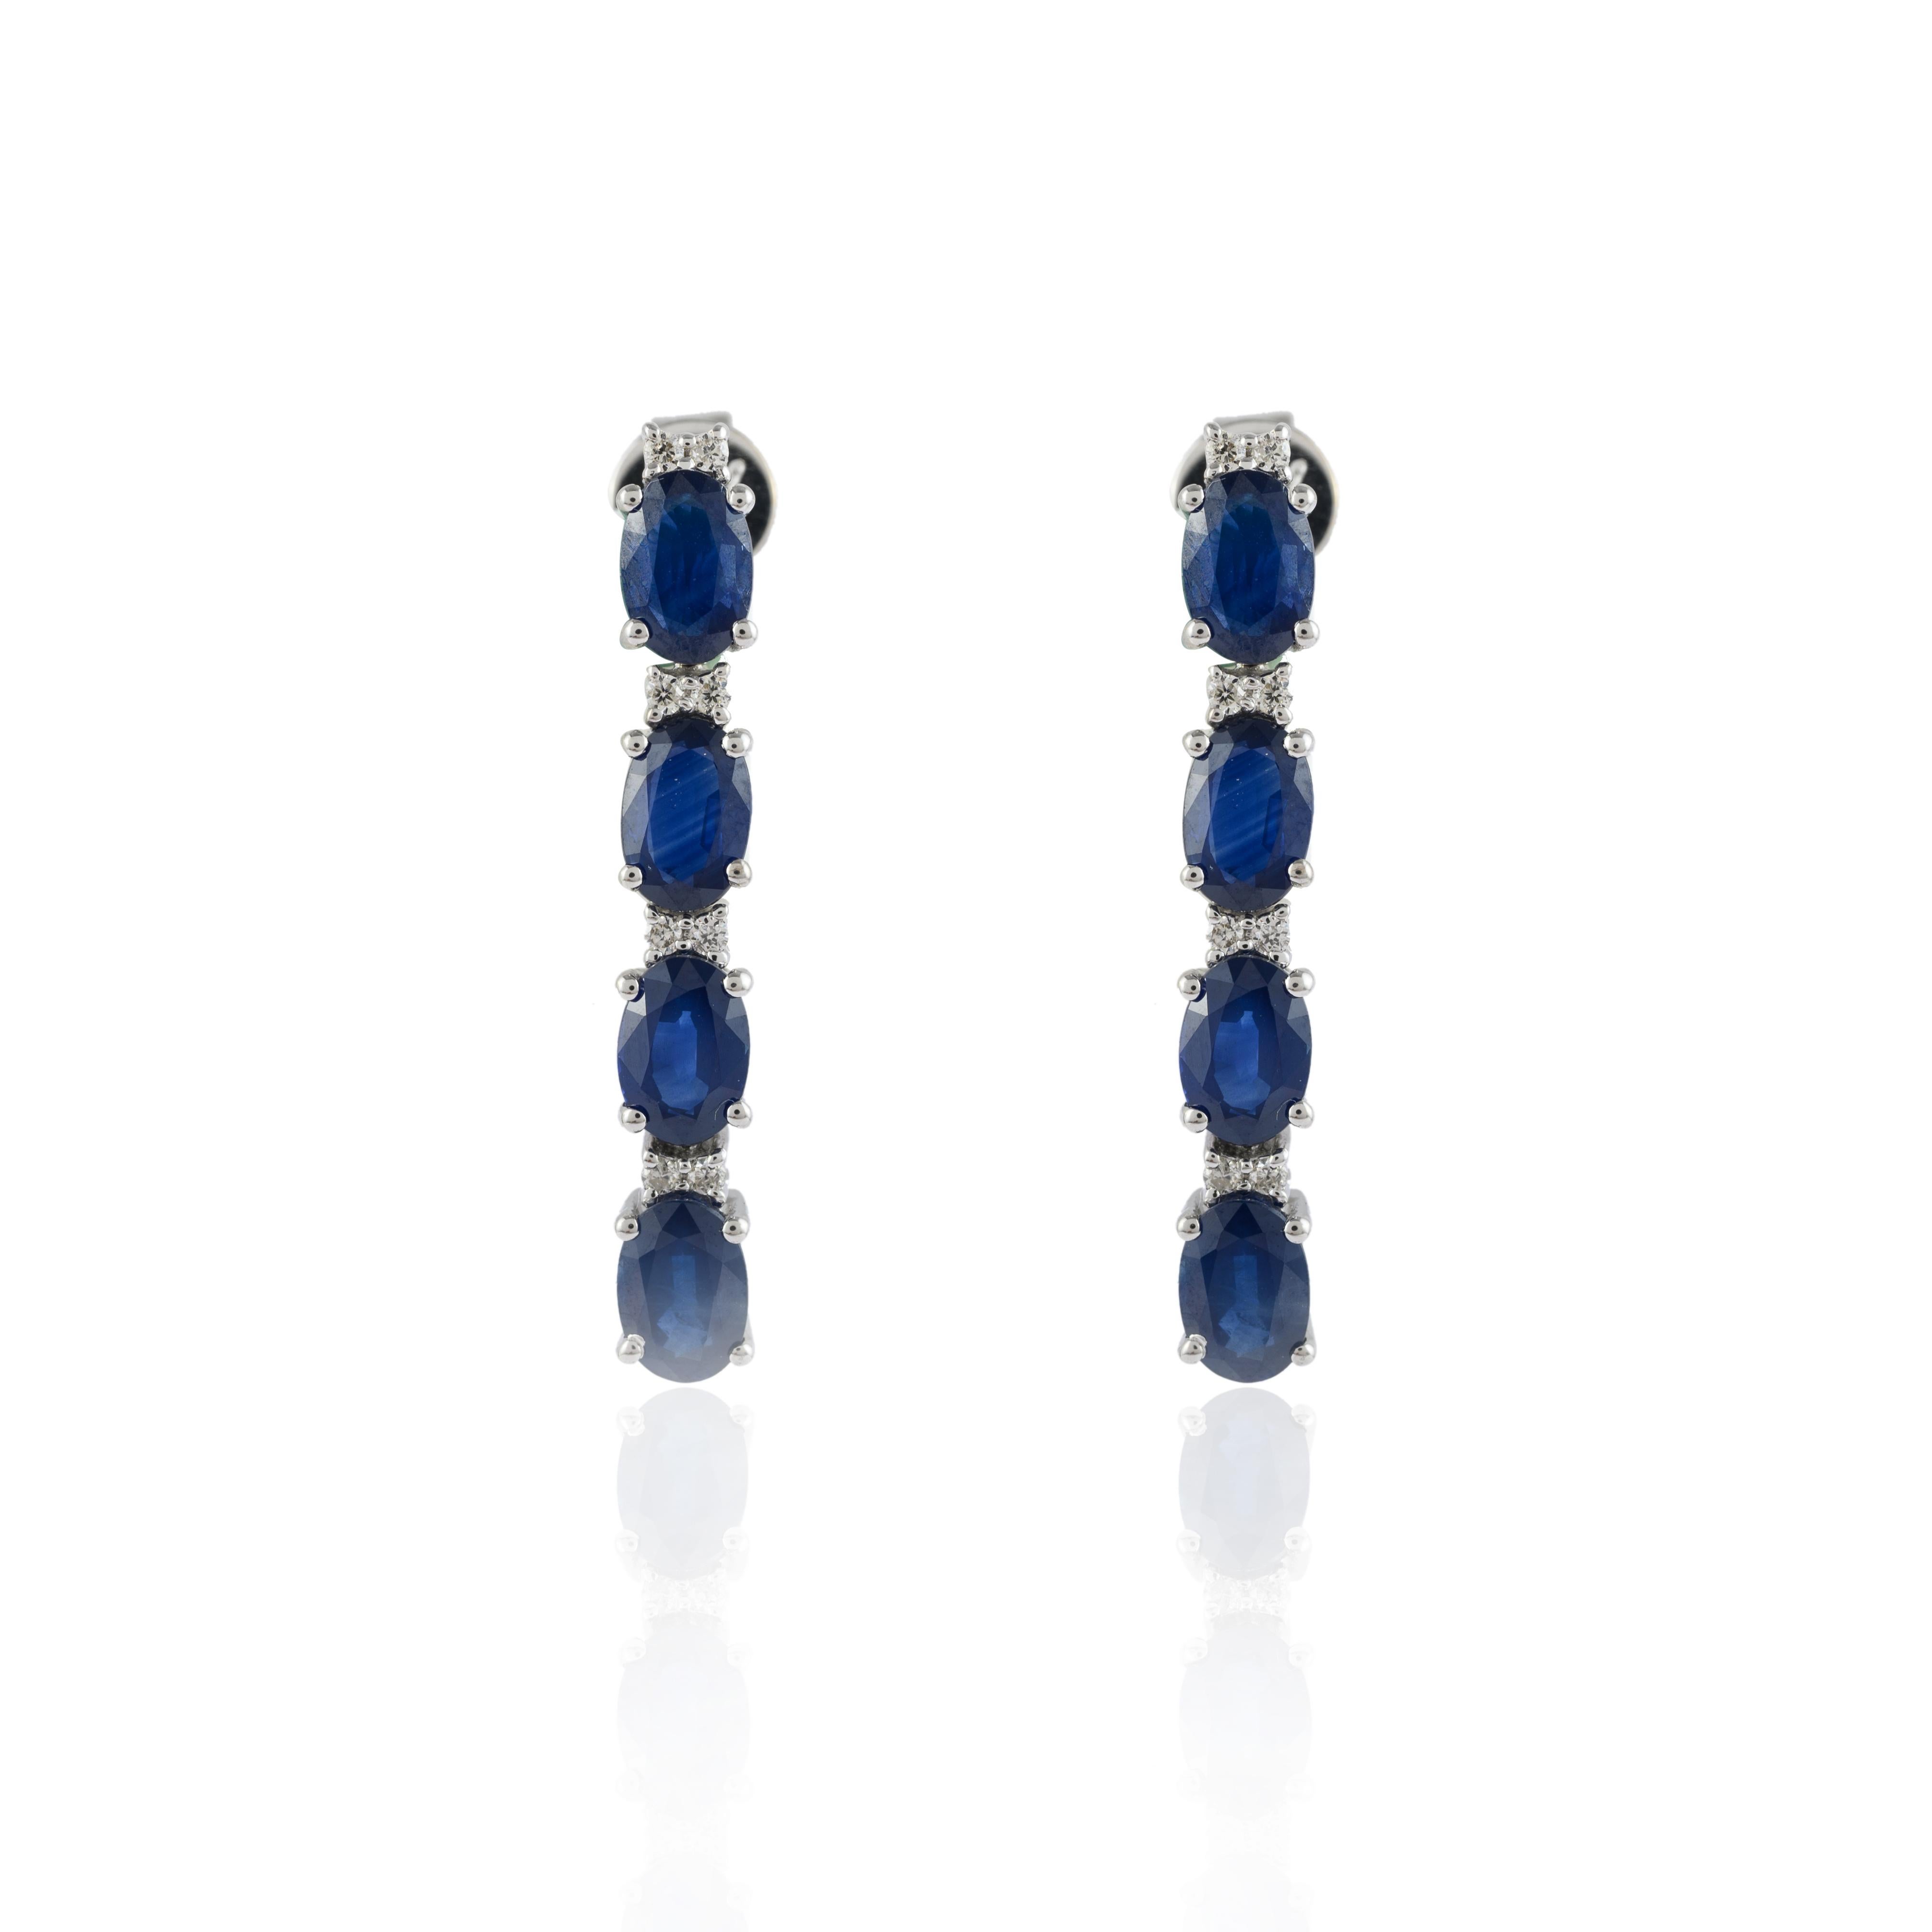 Diamond blue sapphire dangle earrings in 14K gold to make a statement with your look. These earrings create a sparkling, luxurious look featuring oval cut gemstone.
Sapphire stimulates concentration and reduces stress. 
Designed with alternate oval